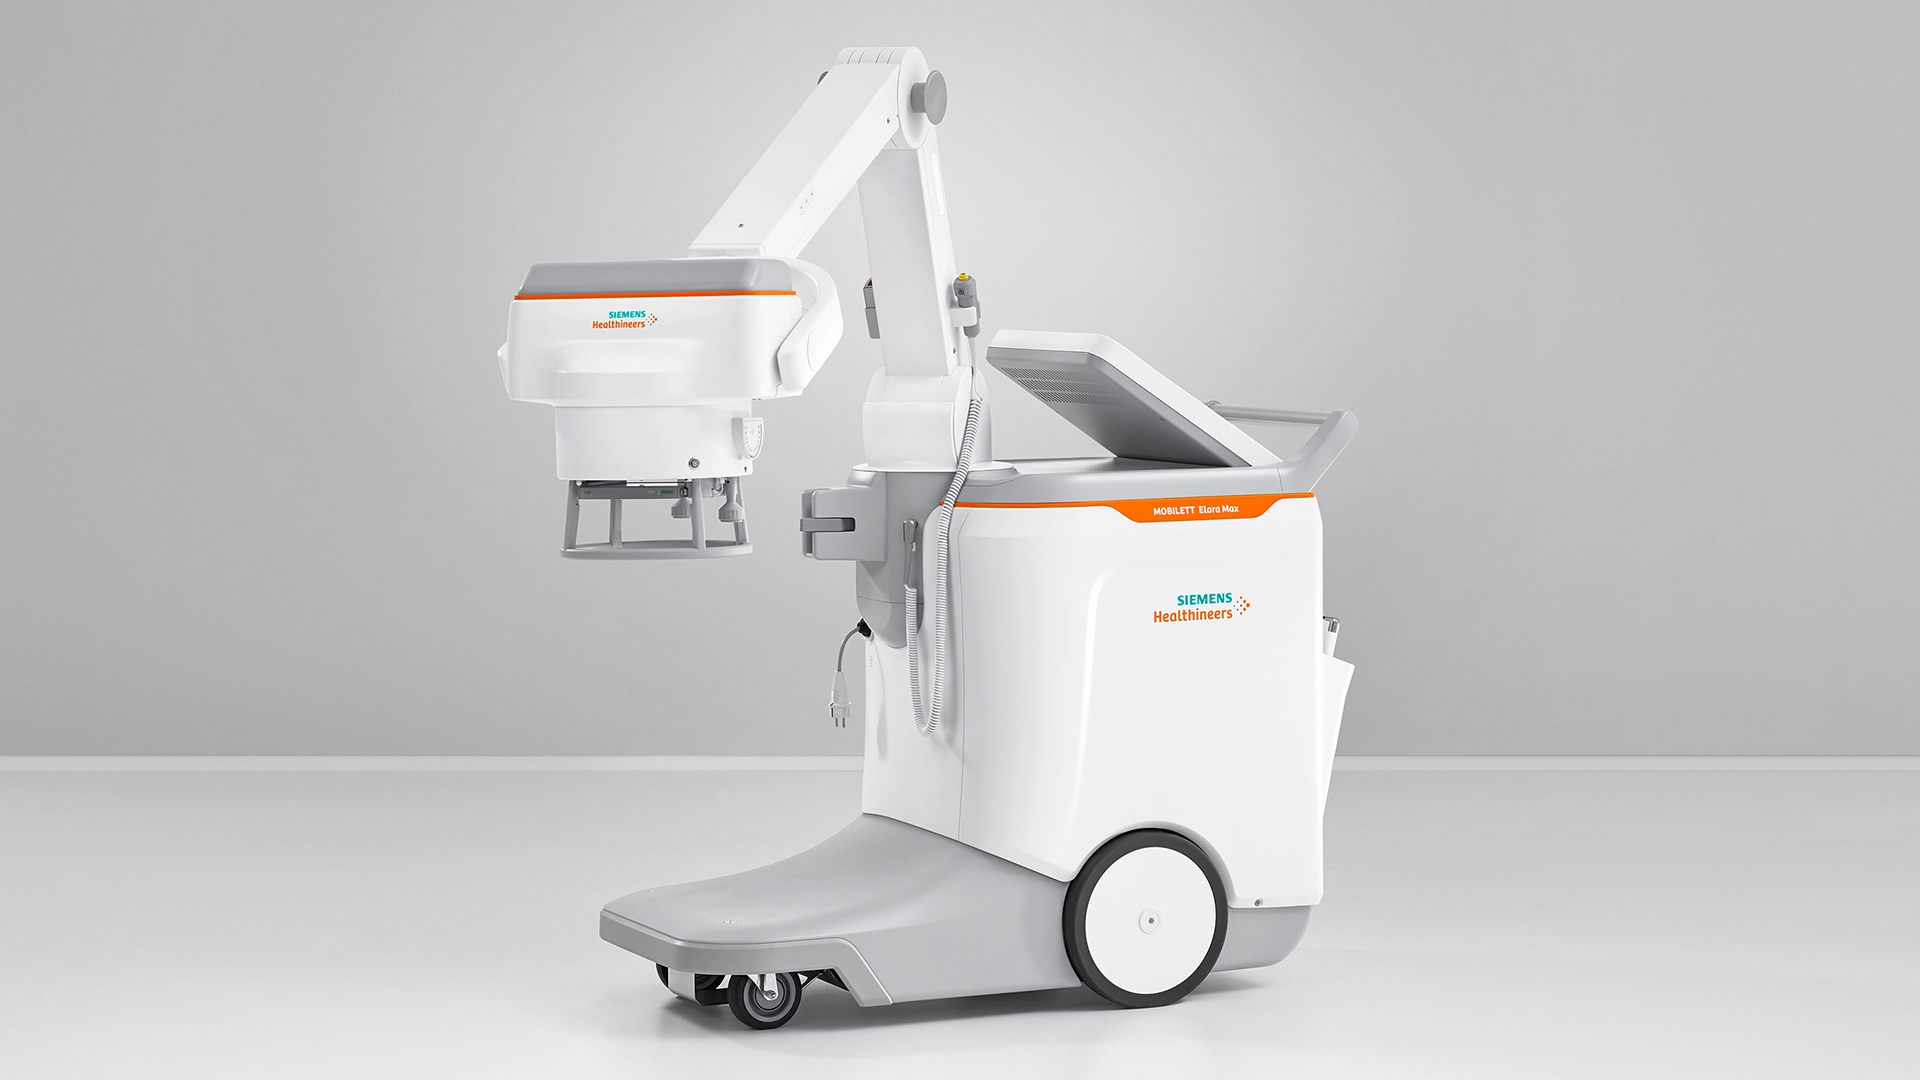 Siemens Healthineers earned FDA clearance in 2019 for the Mobilett Elara Max mobile X-ray system